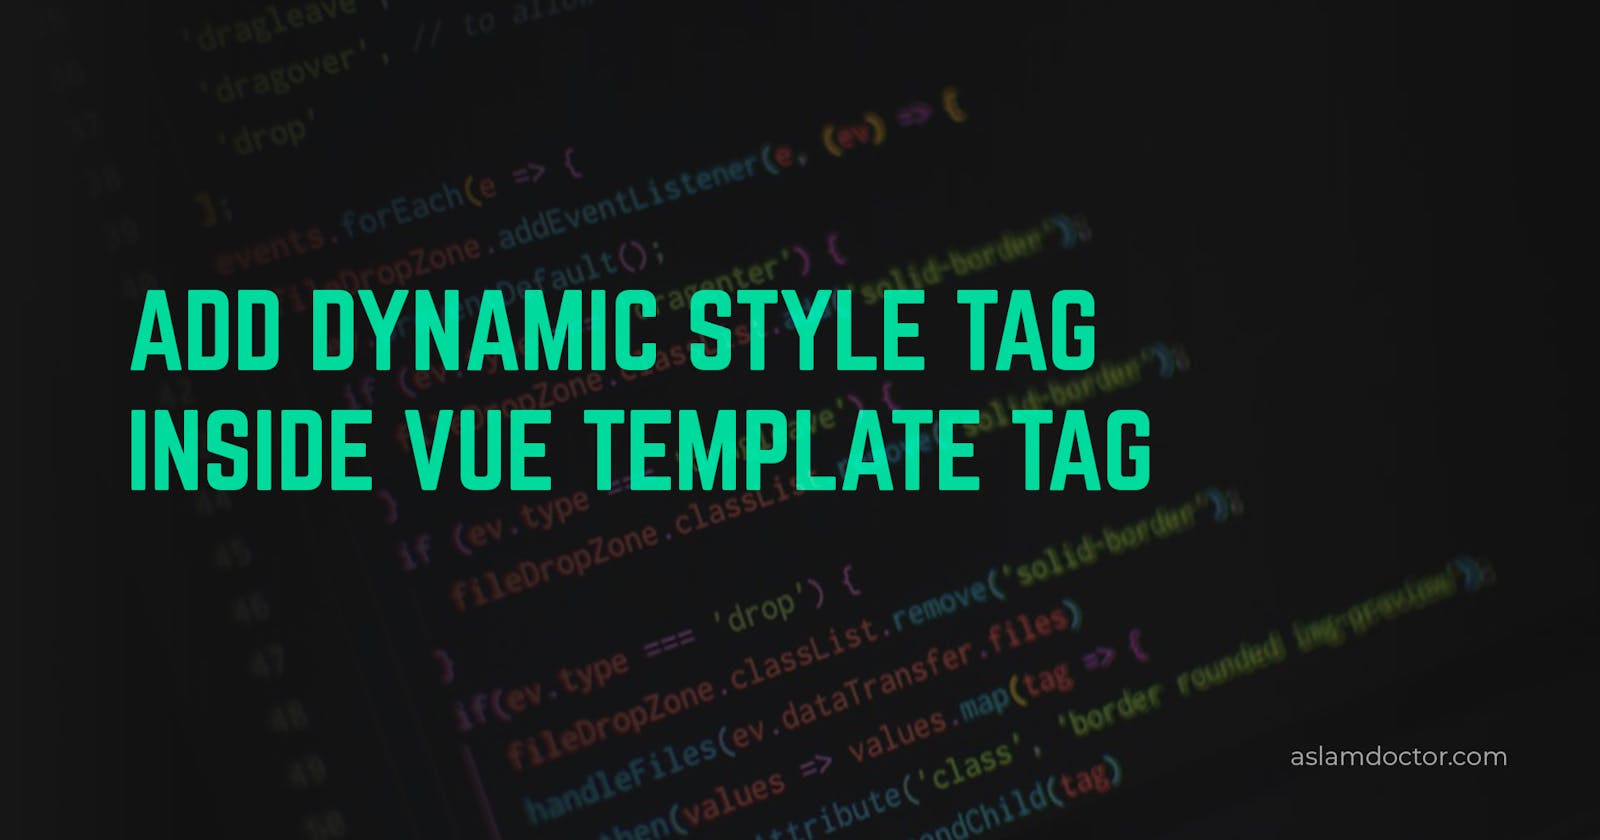 Add dynamic style tag inside Vue template tag